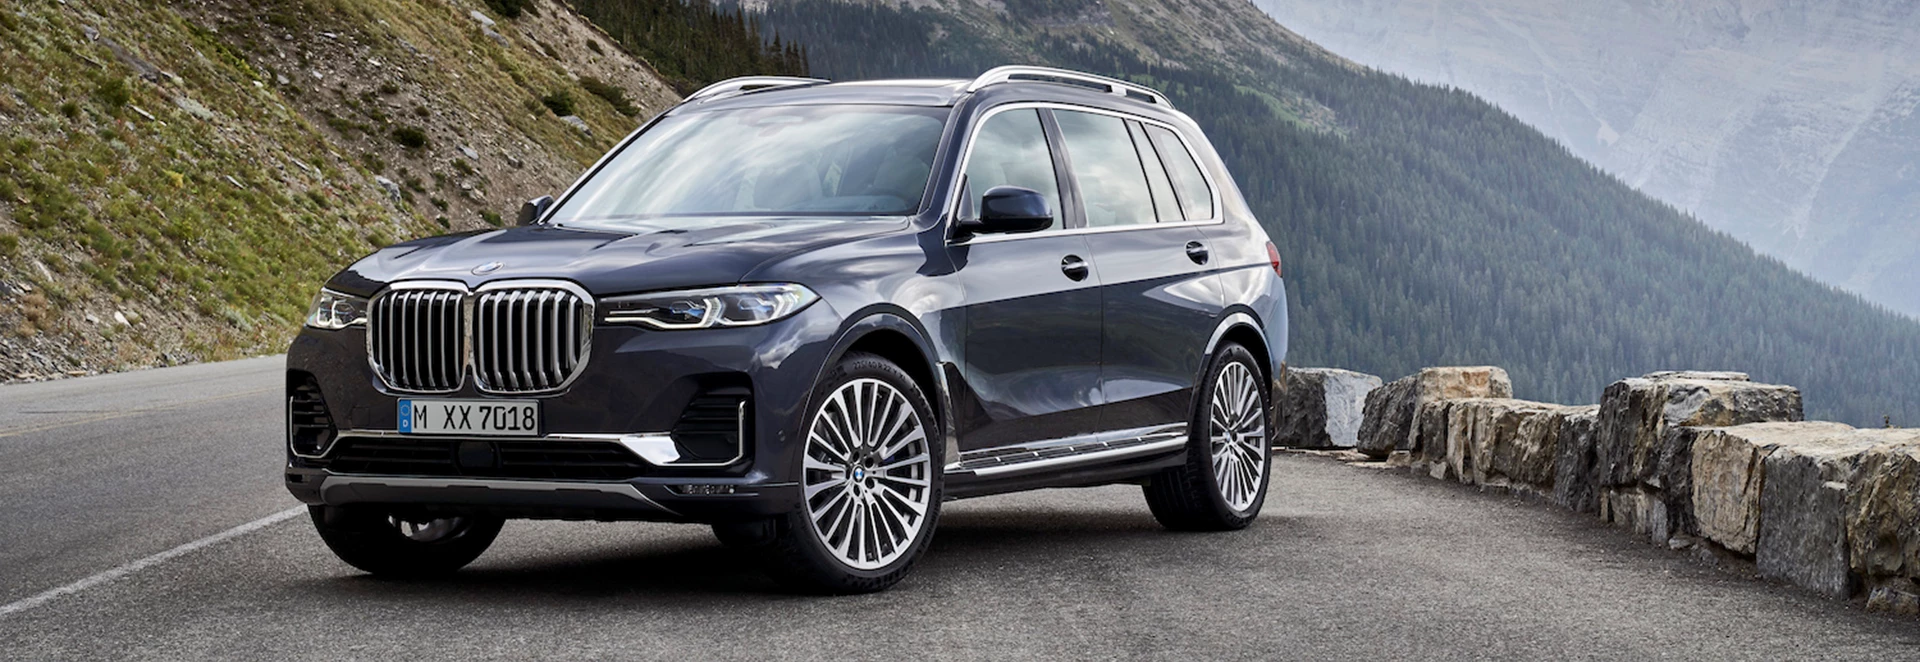 Buyer’s Guide to the BMW X7